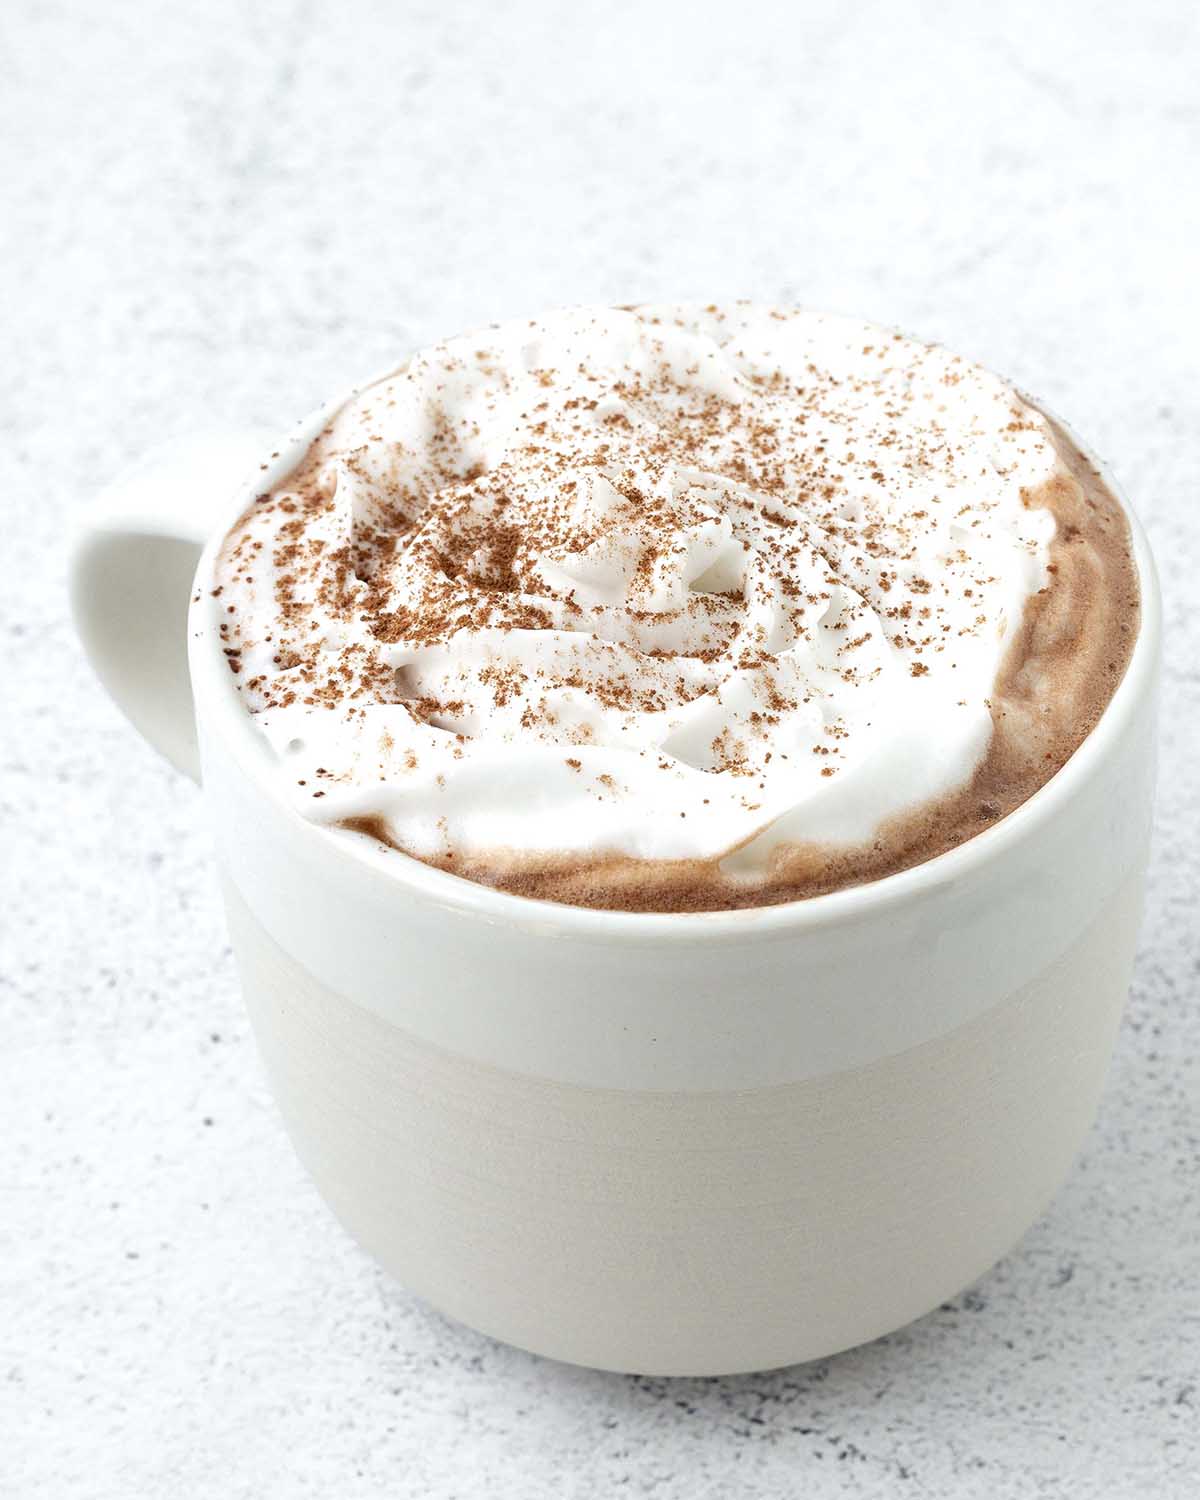 A mug of non-dairy hot chocolate in a mug, it is garnished with vegan whipped cream and a dusting of cocoa powder.